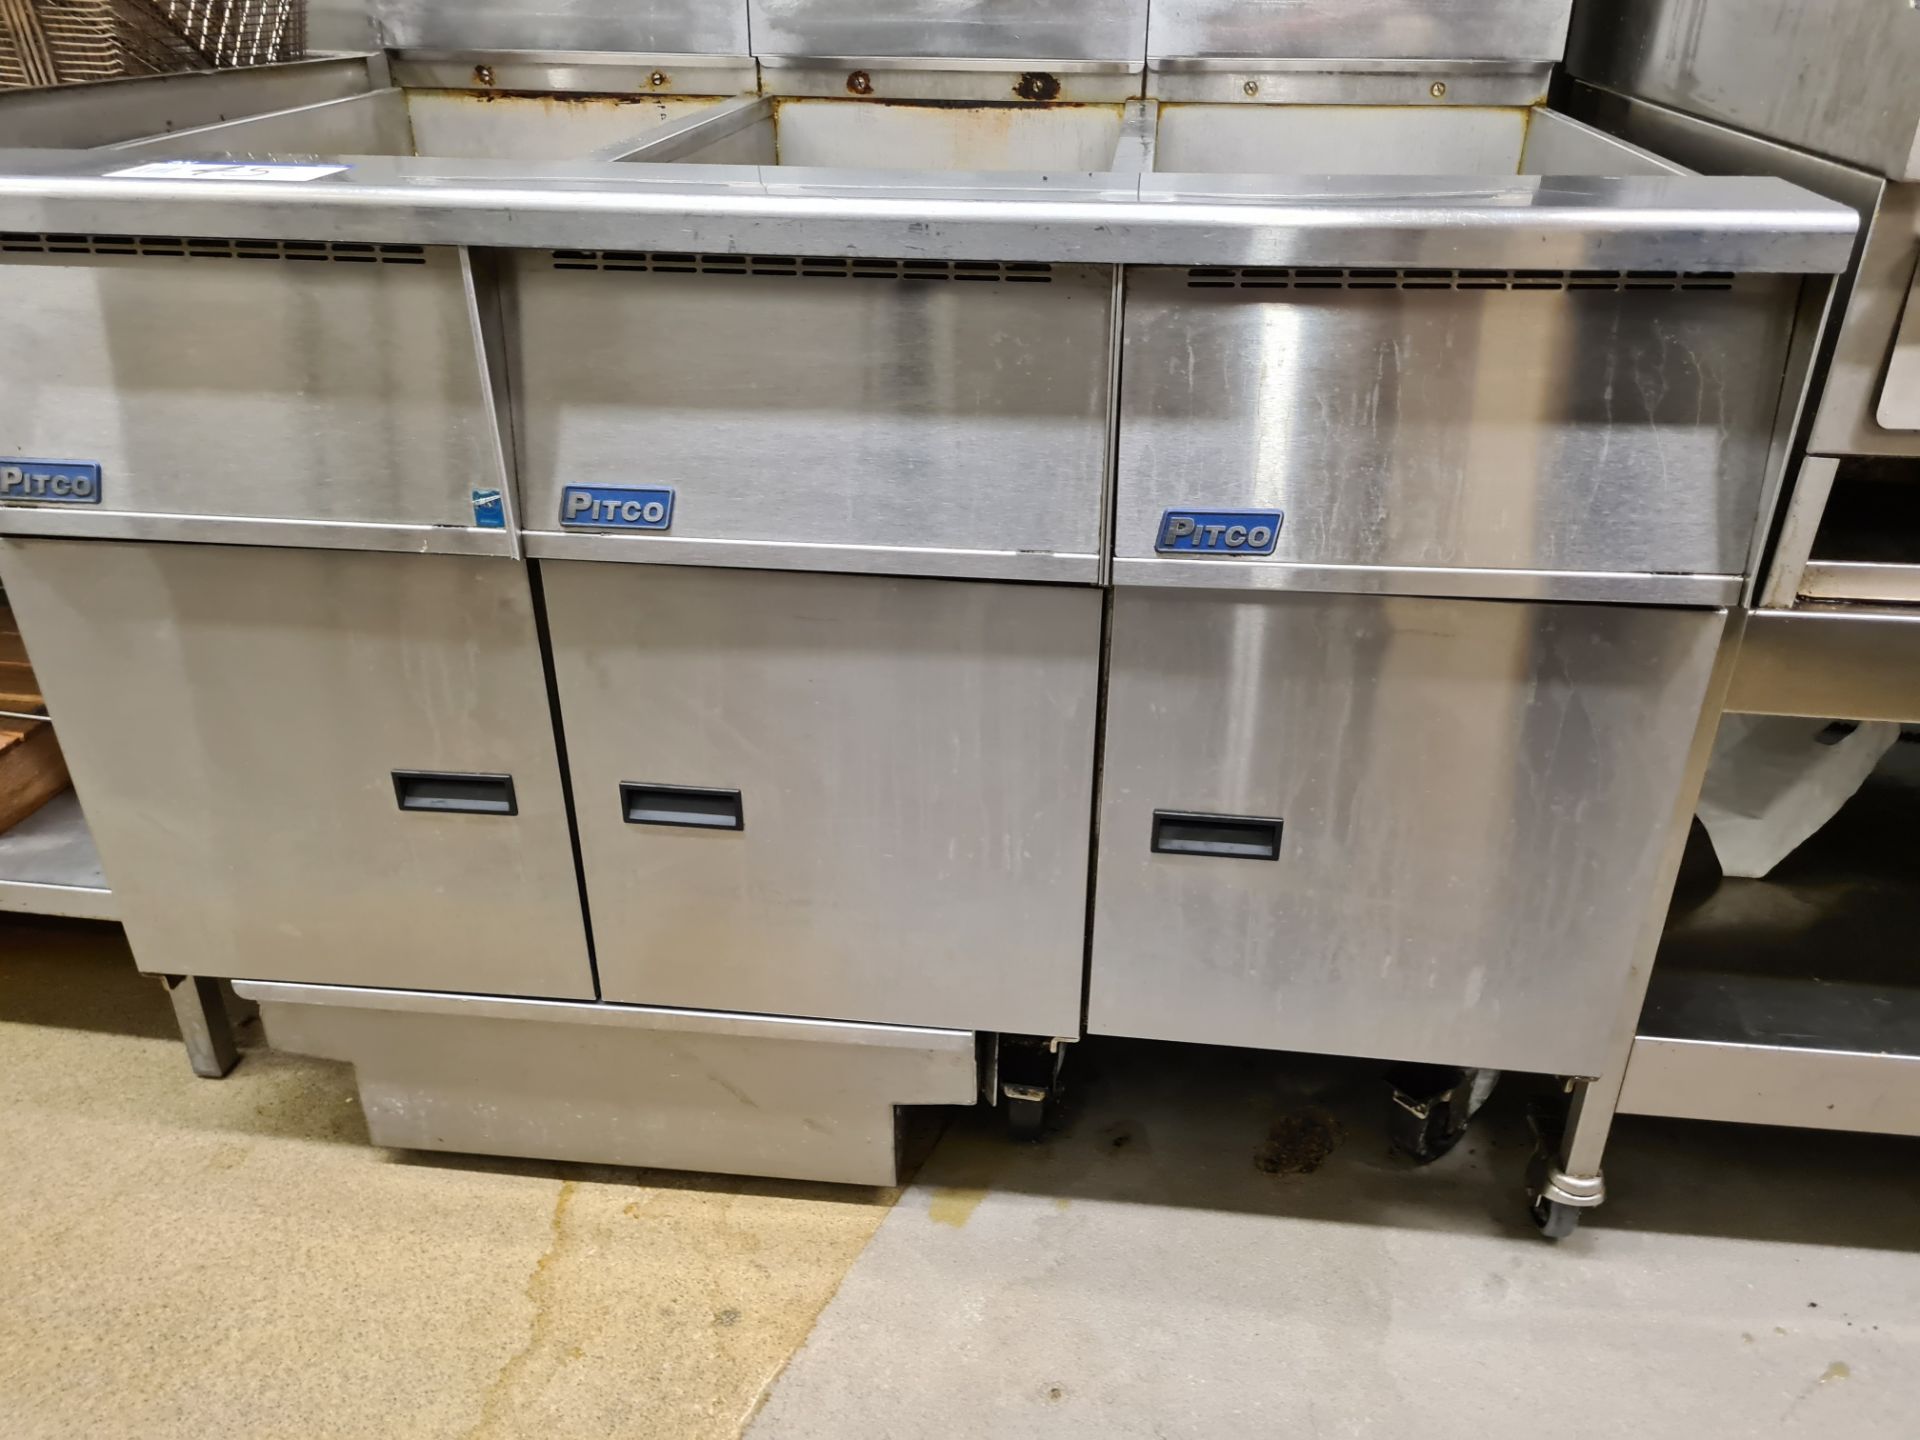 PITCO Stainless Steel Triple Mobile Deep Fat Fryer c/w Six Frying Baskets, Approx. 1.2m (L) x 0. - Image 5 of 7